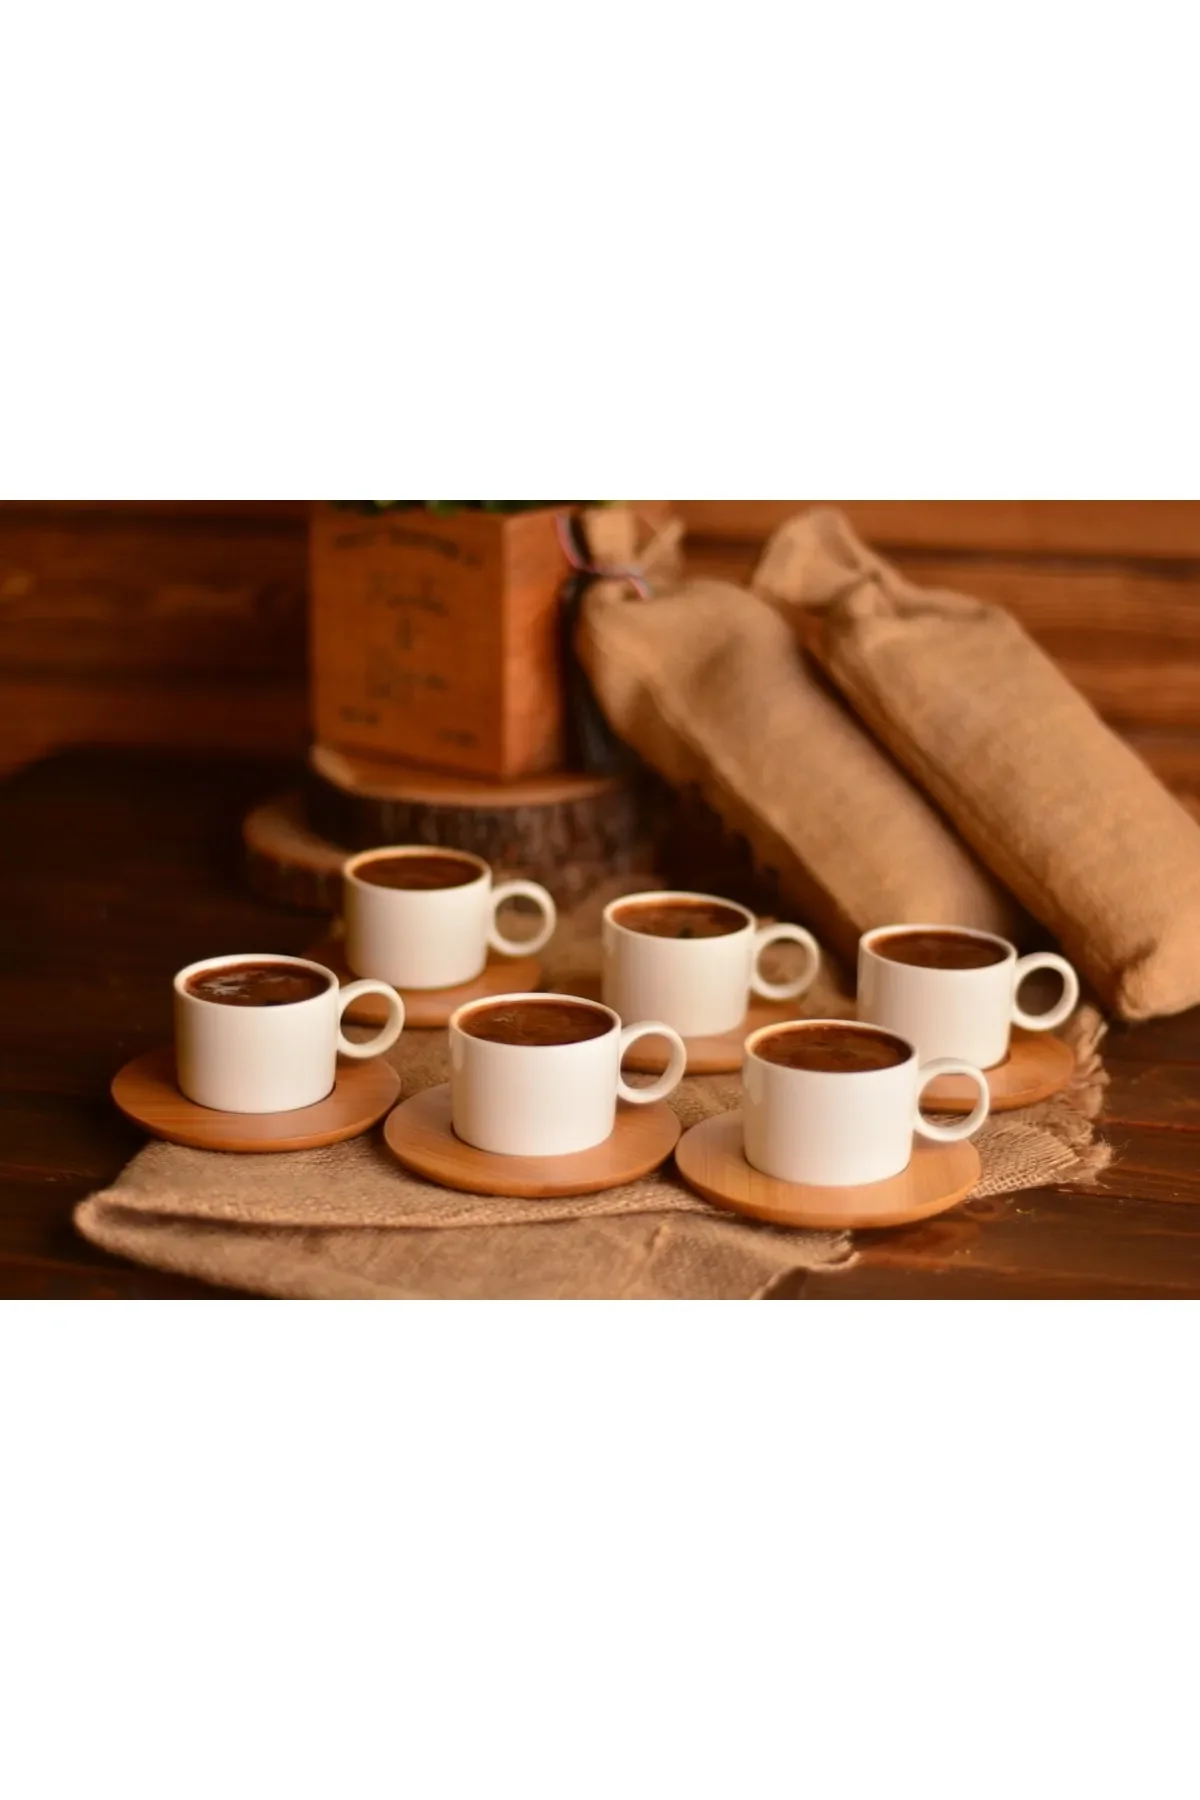 

6 Serves Coffee and Tea Espresso Cup Set with White Cup and Wooden Bottom Set 90 ml Porcelain Cups 12 Pieces 6 Serves